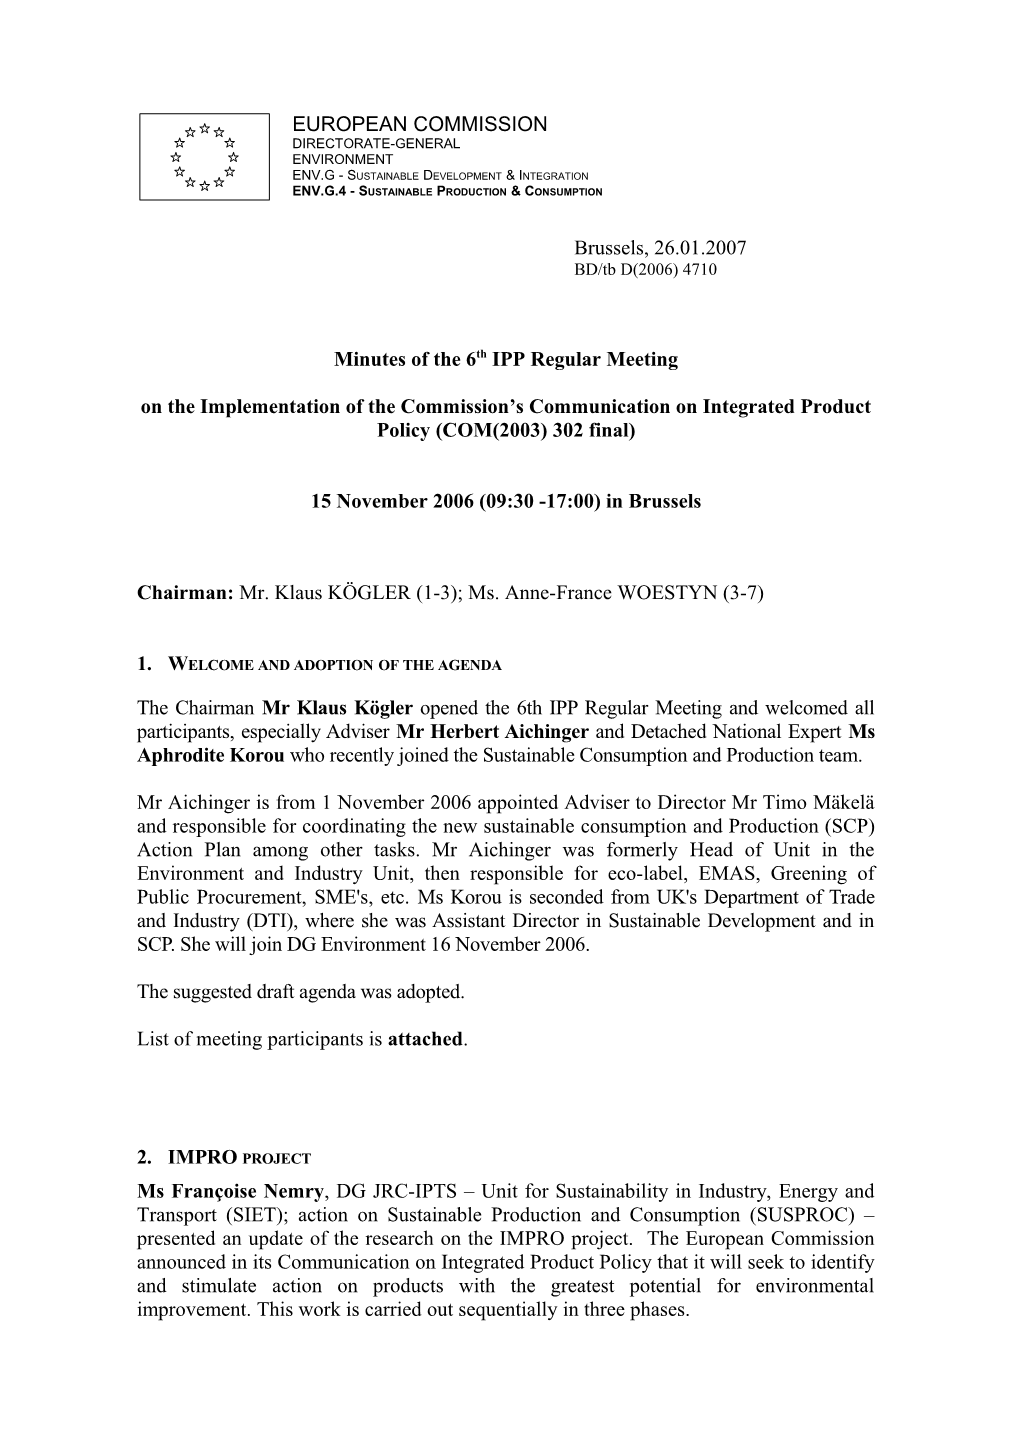 Minutes of the 6Th IPP Regular Meeting